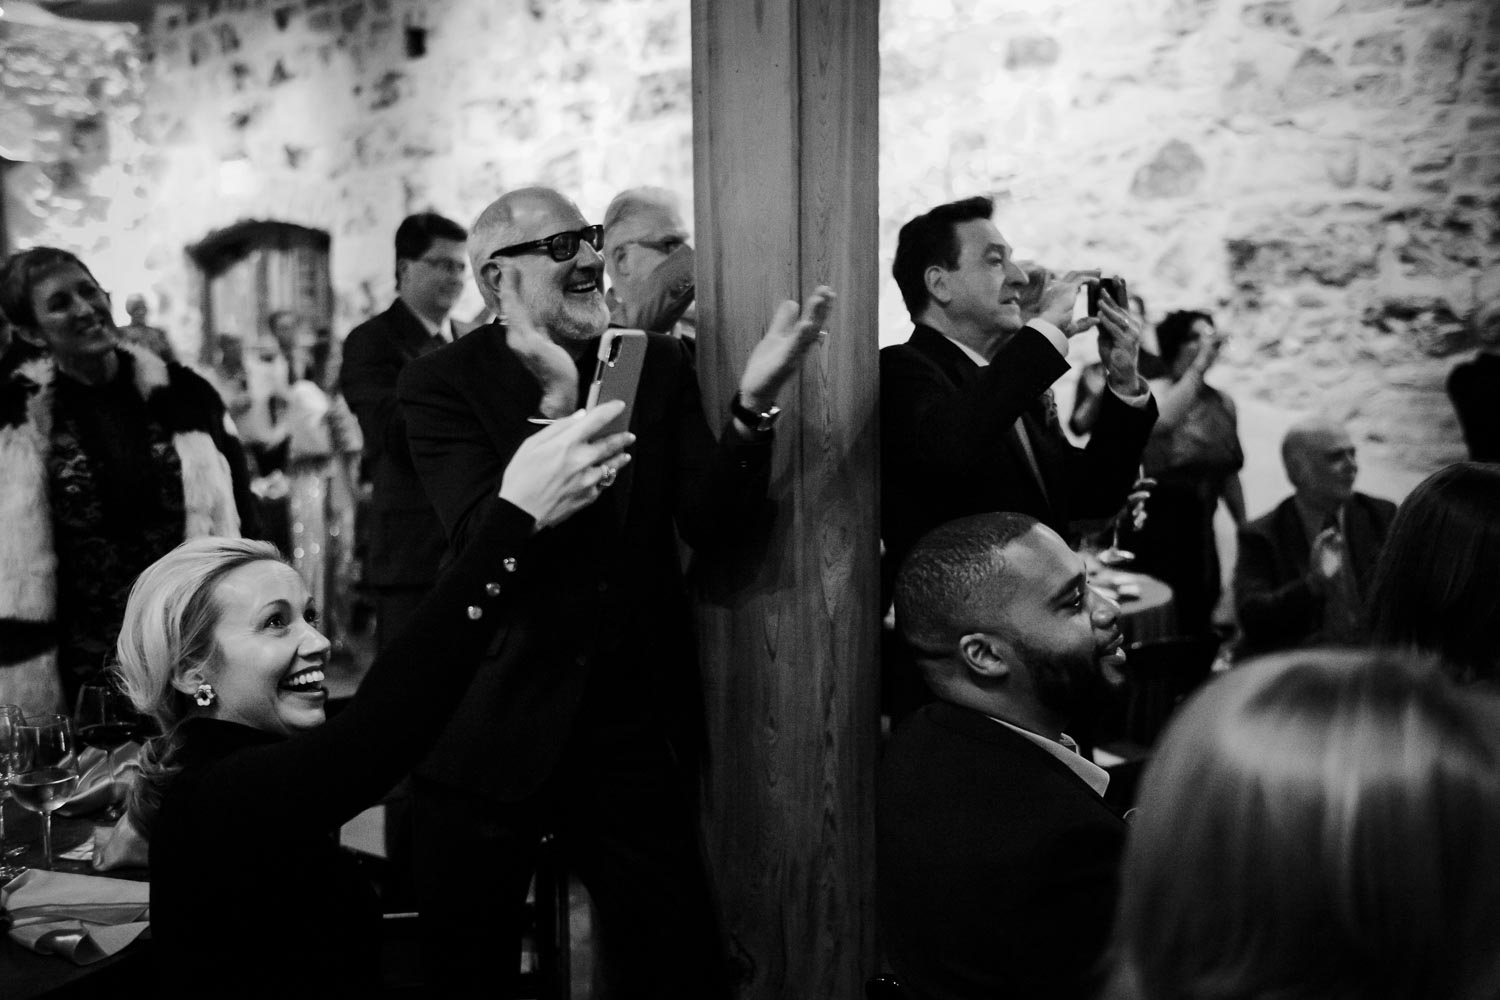 Guest react to the grooms first dance L1009921